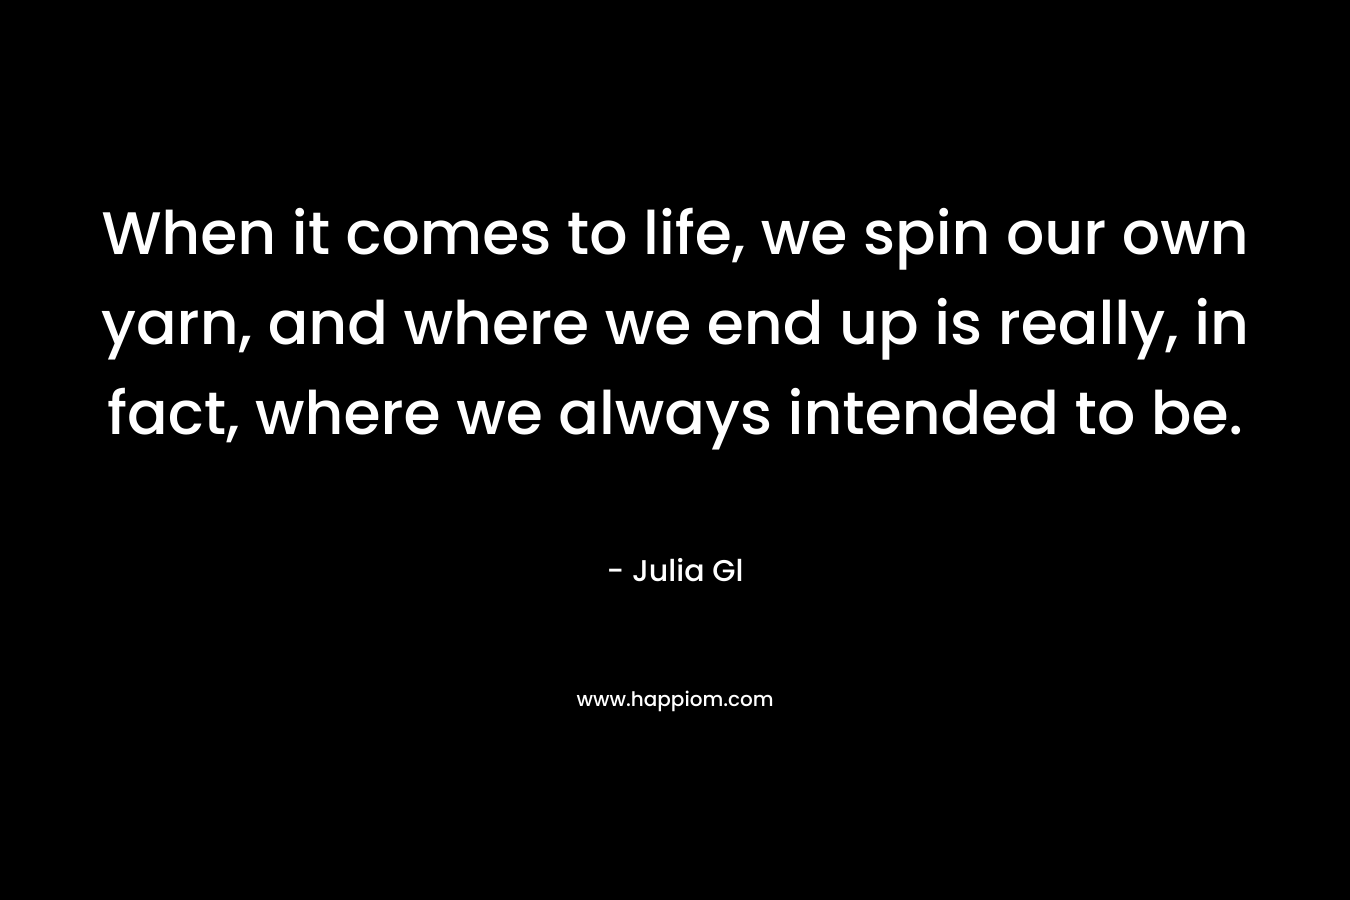 When it comes to life, we spin our own yarn, and where we end up is really, in fact, where we always intended to be. – Julia Gl